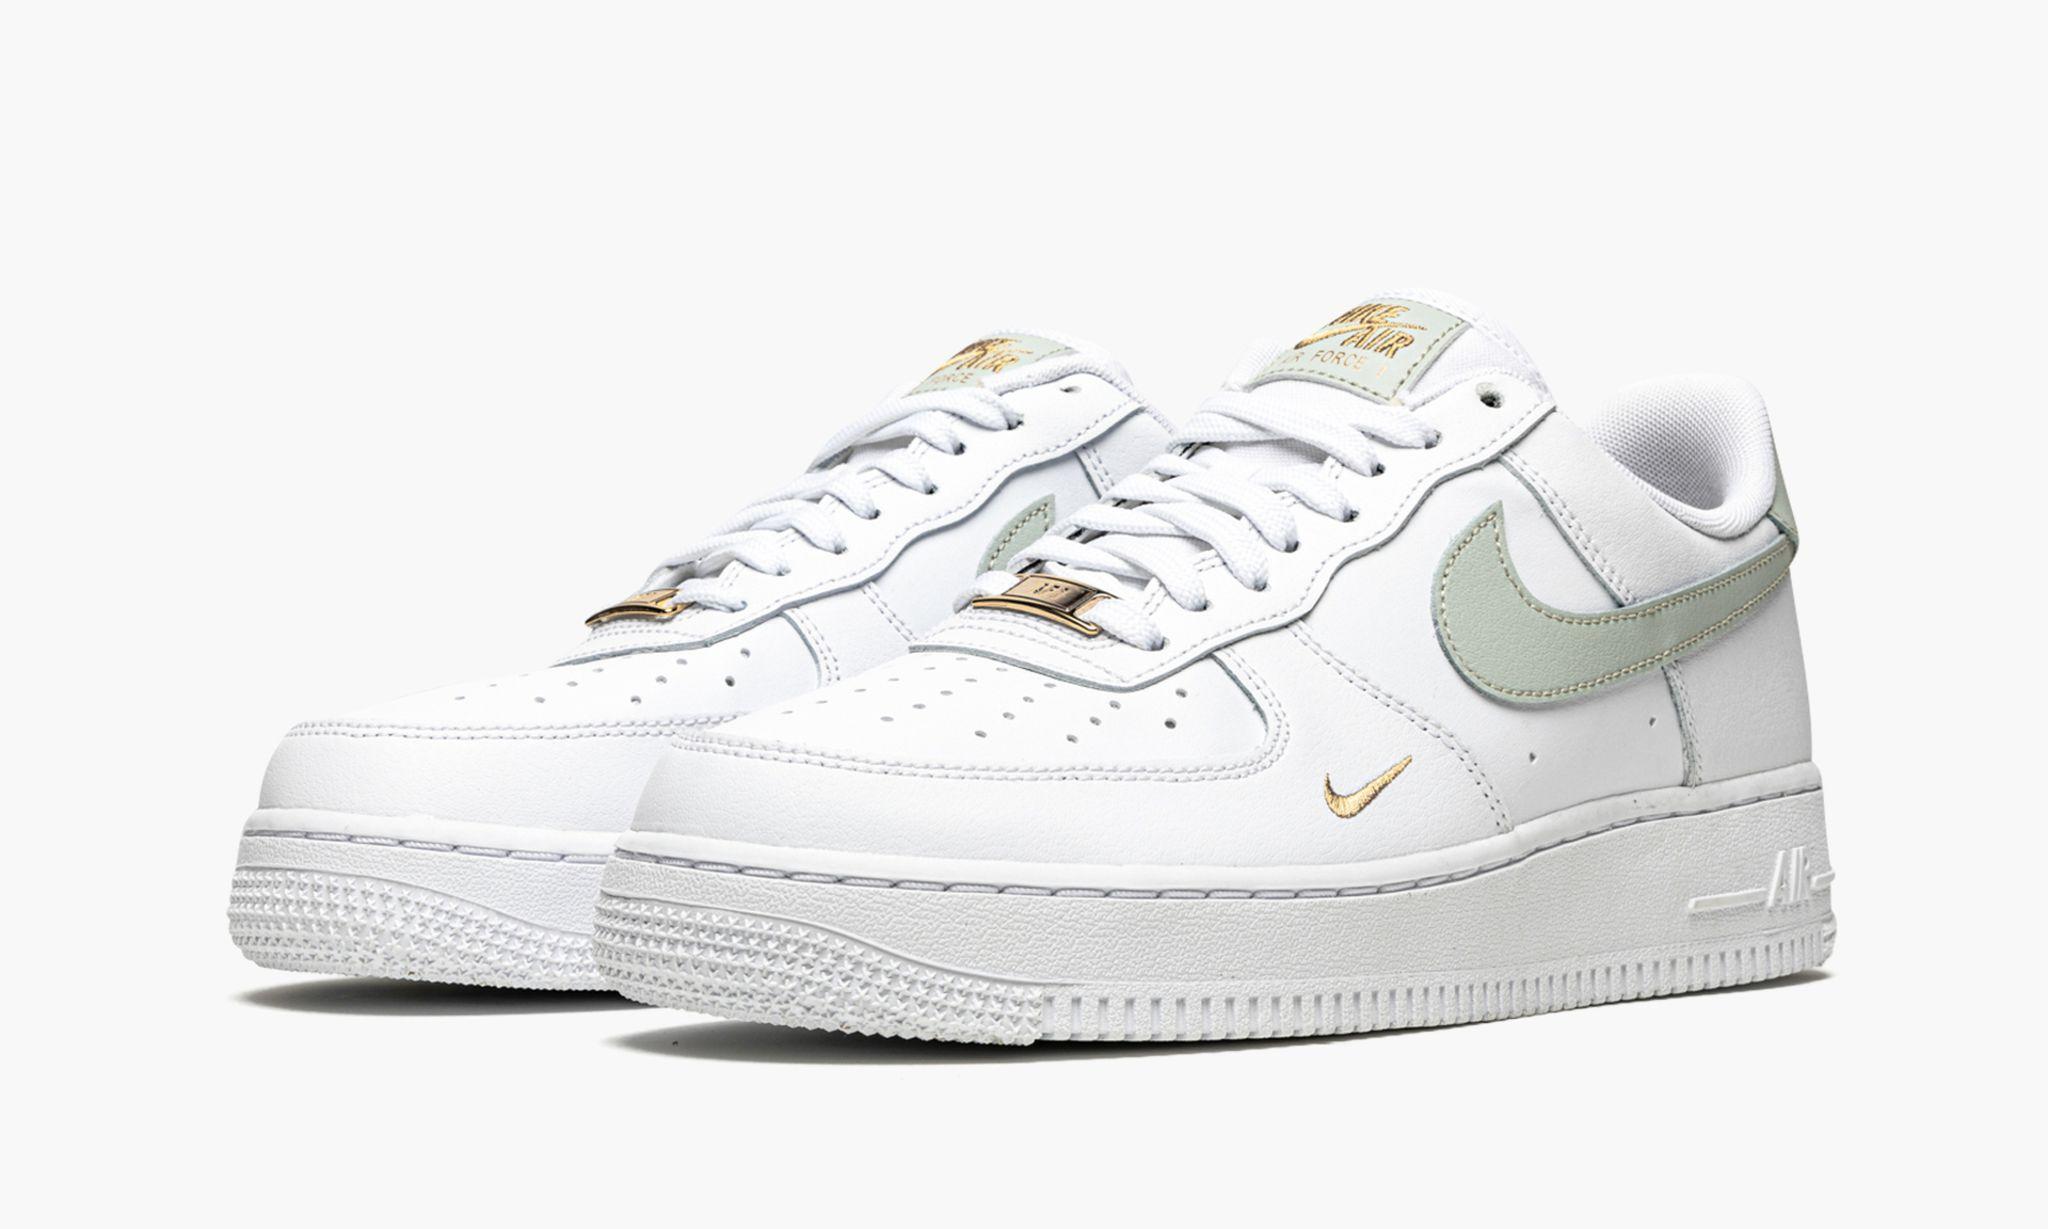 Nike Air Force 1 Low "white / Grey / Gold" Shoes in Black | Lyst